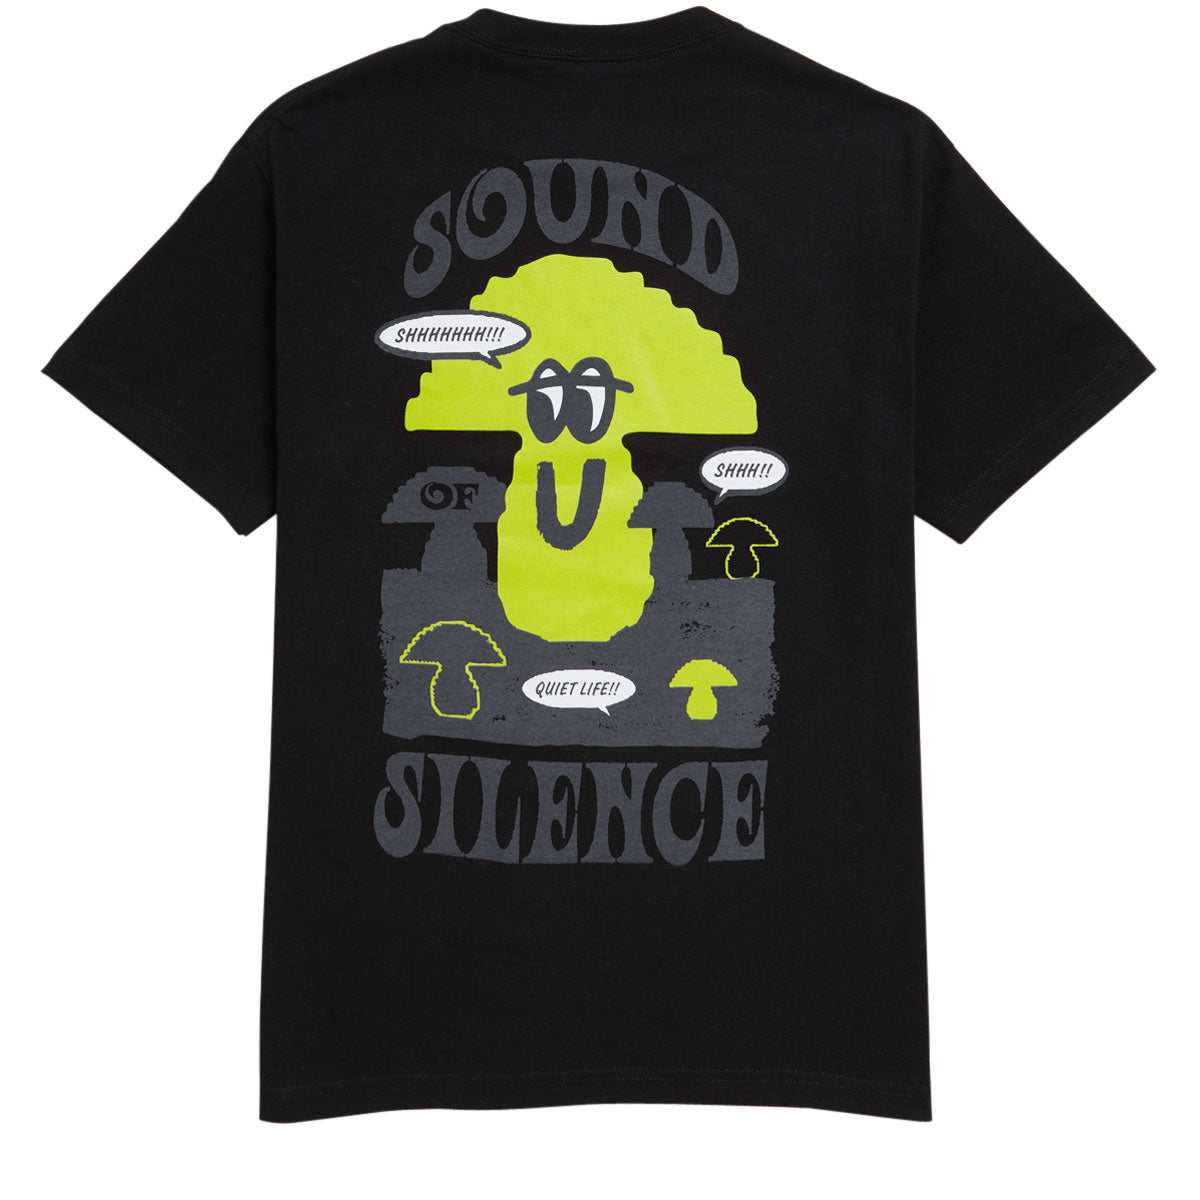 The Quiet Life Sound of Silence T-Shirt - Black image 1